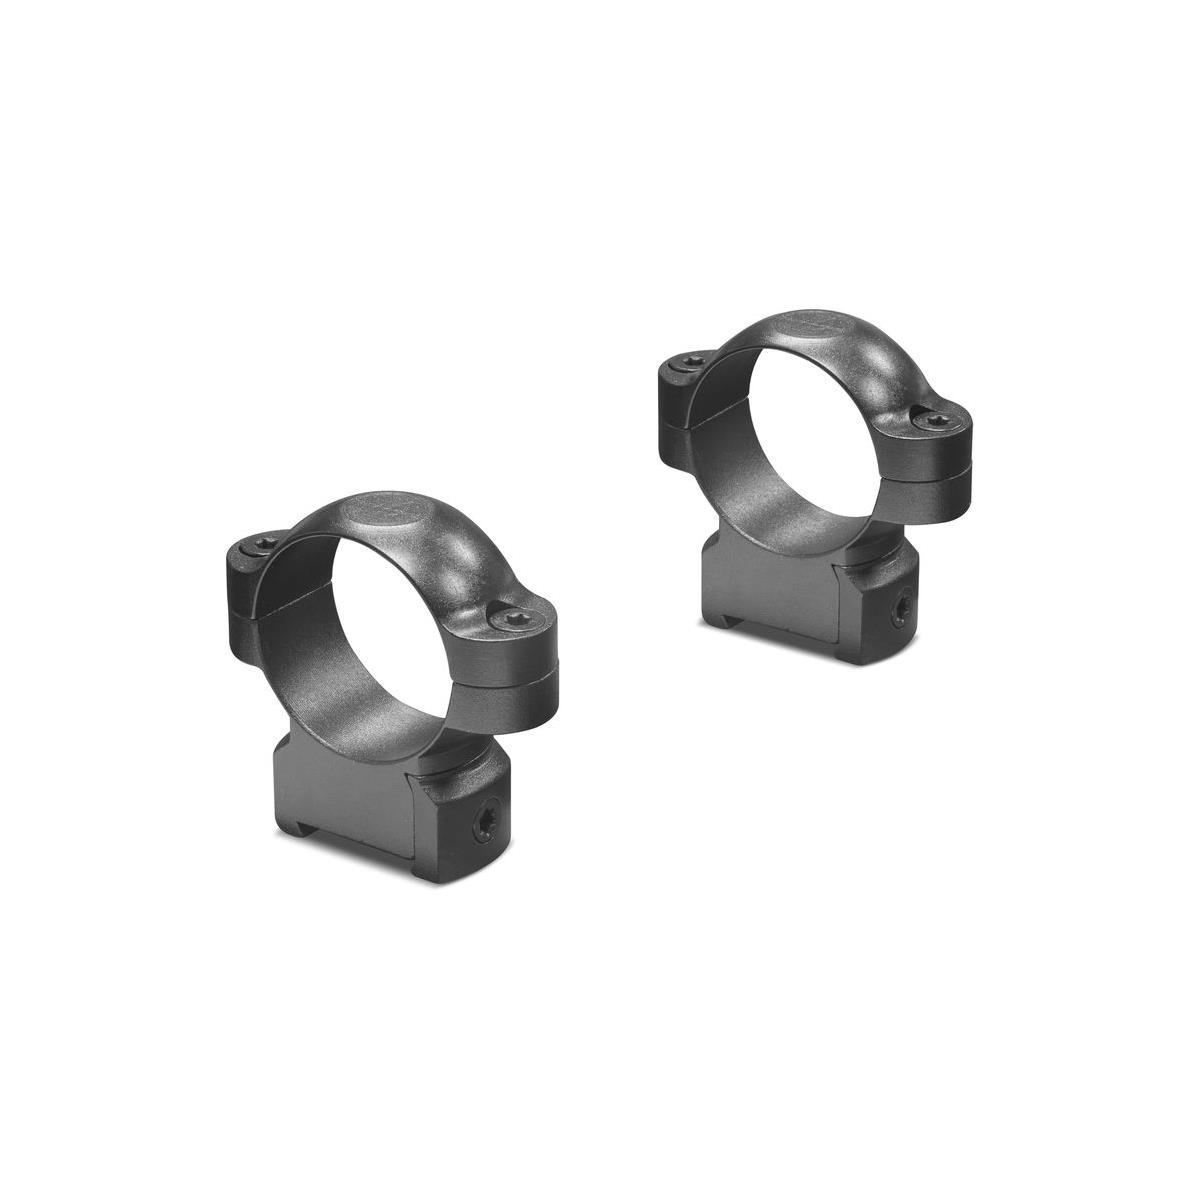 Image of Leupold 30mm Riflescope Ringmounts Compatible with CZ 550 Rifles